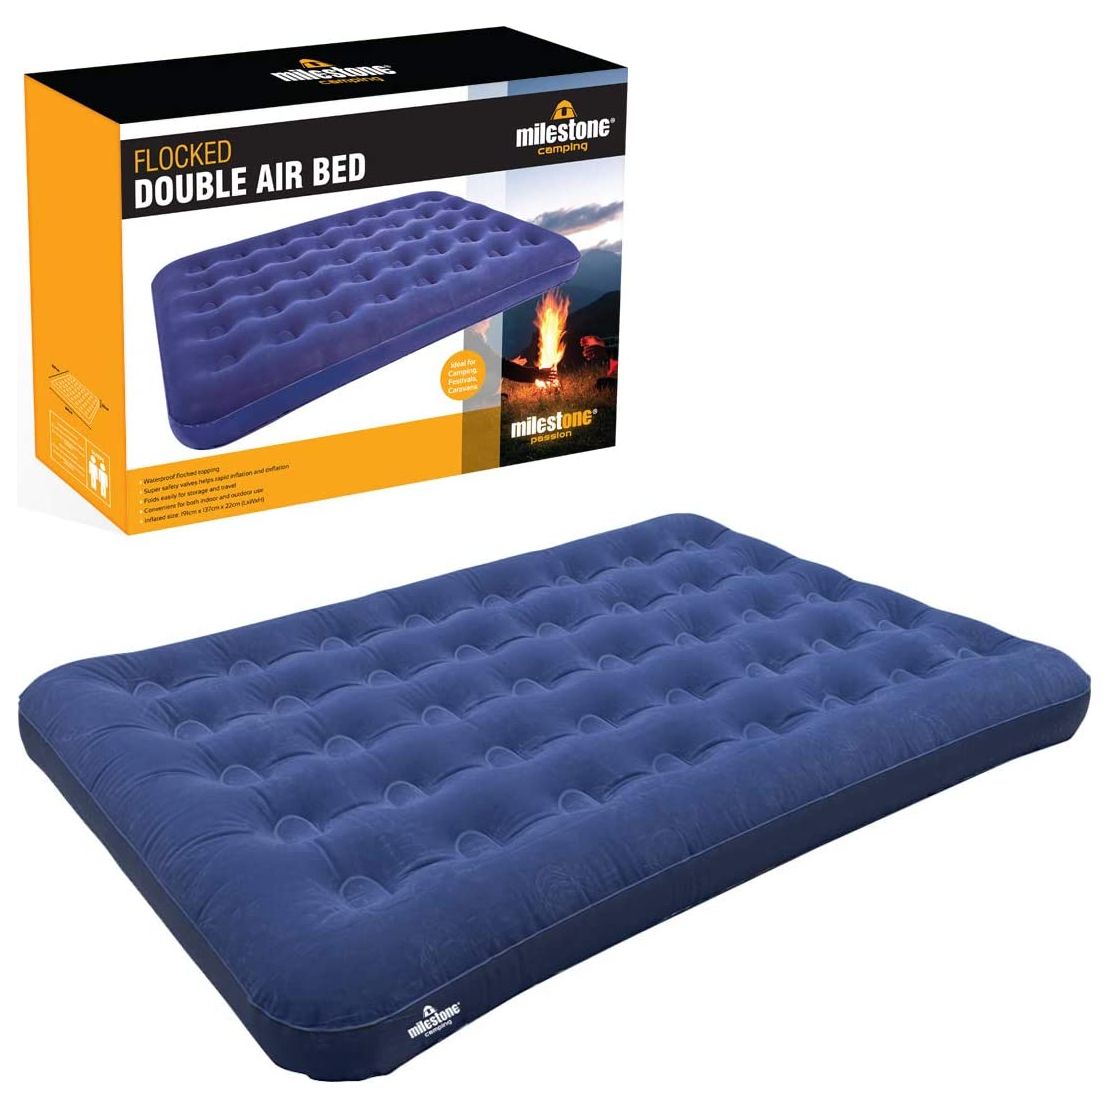 Milestone Camping Flocked Double Air Bed